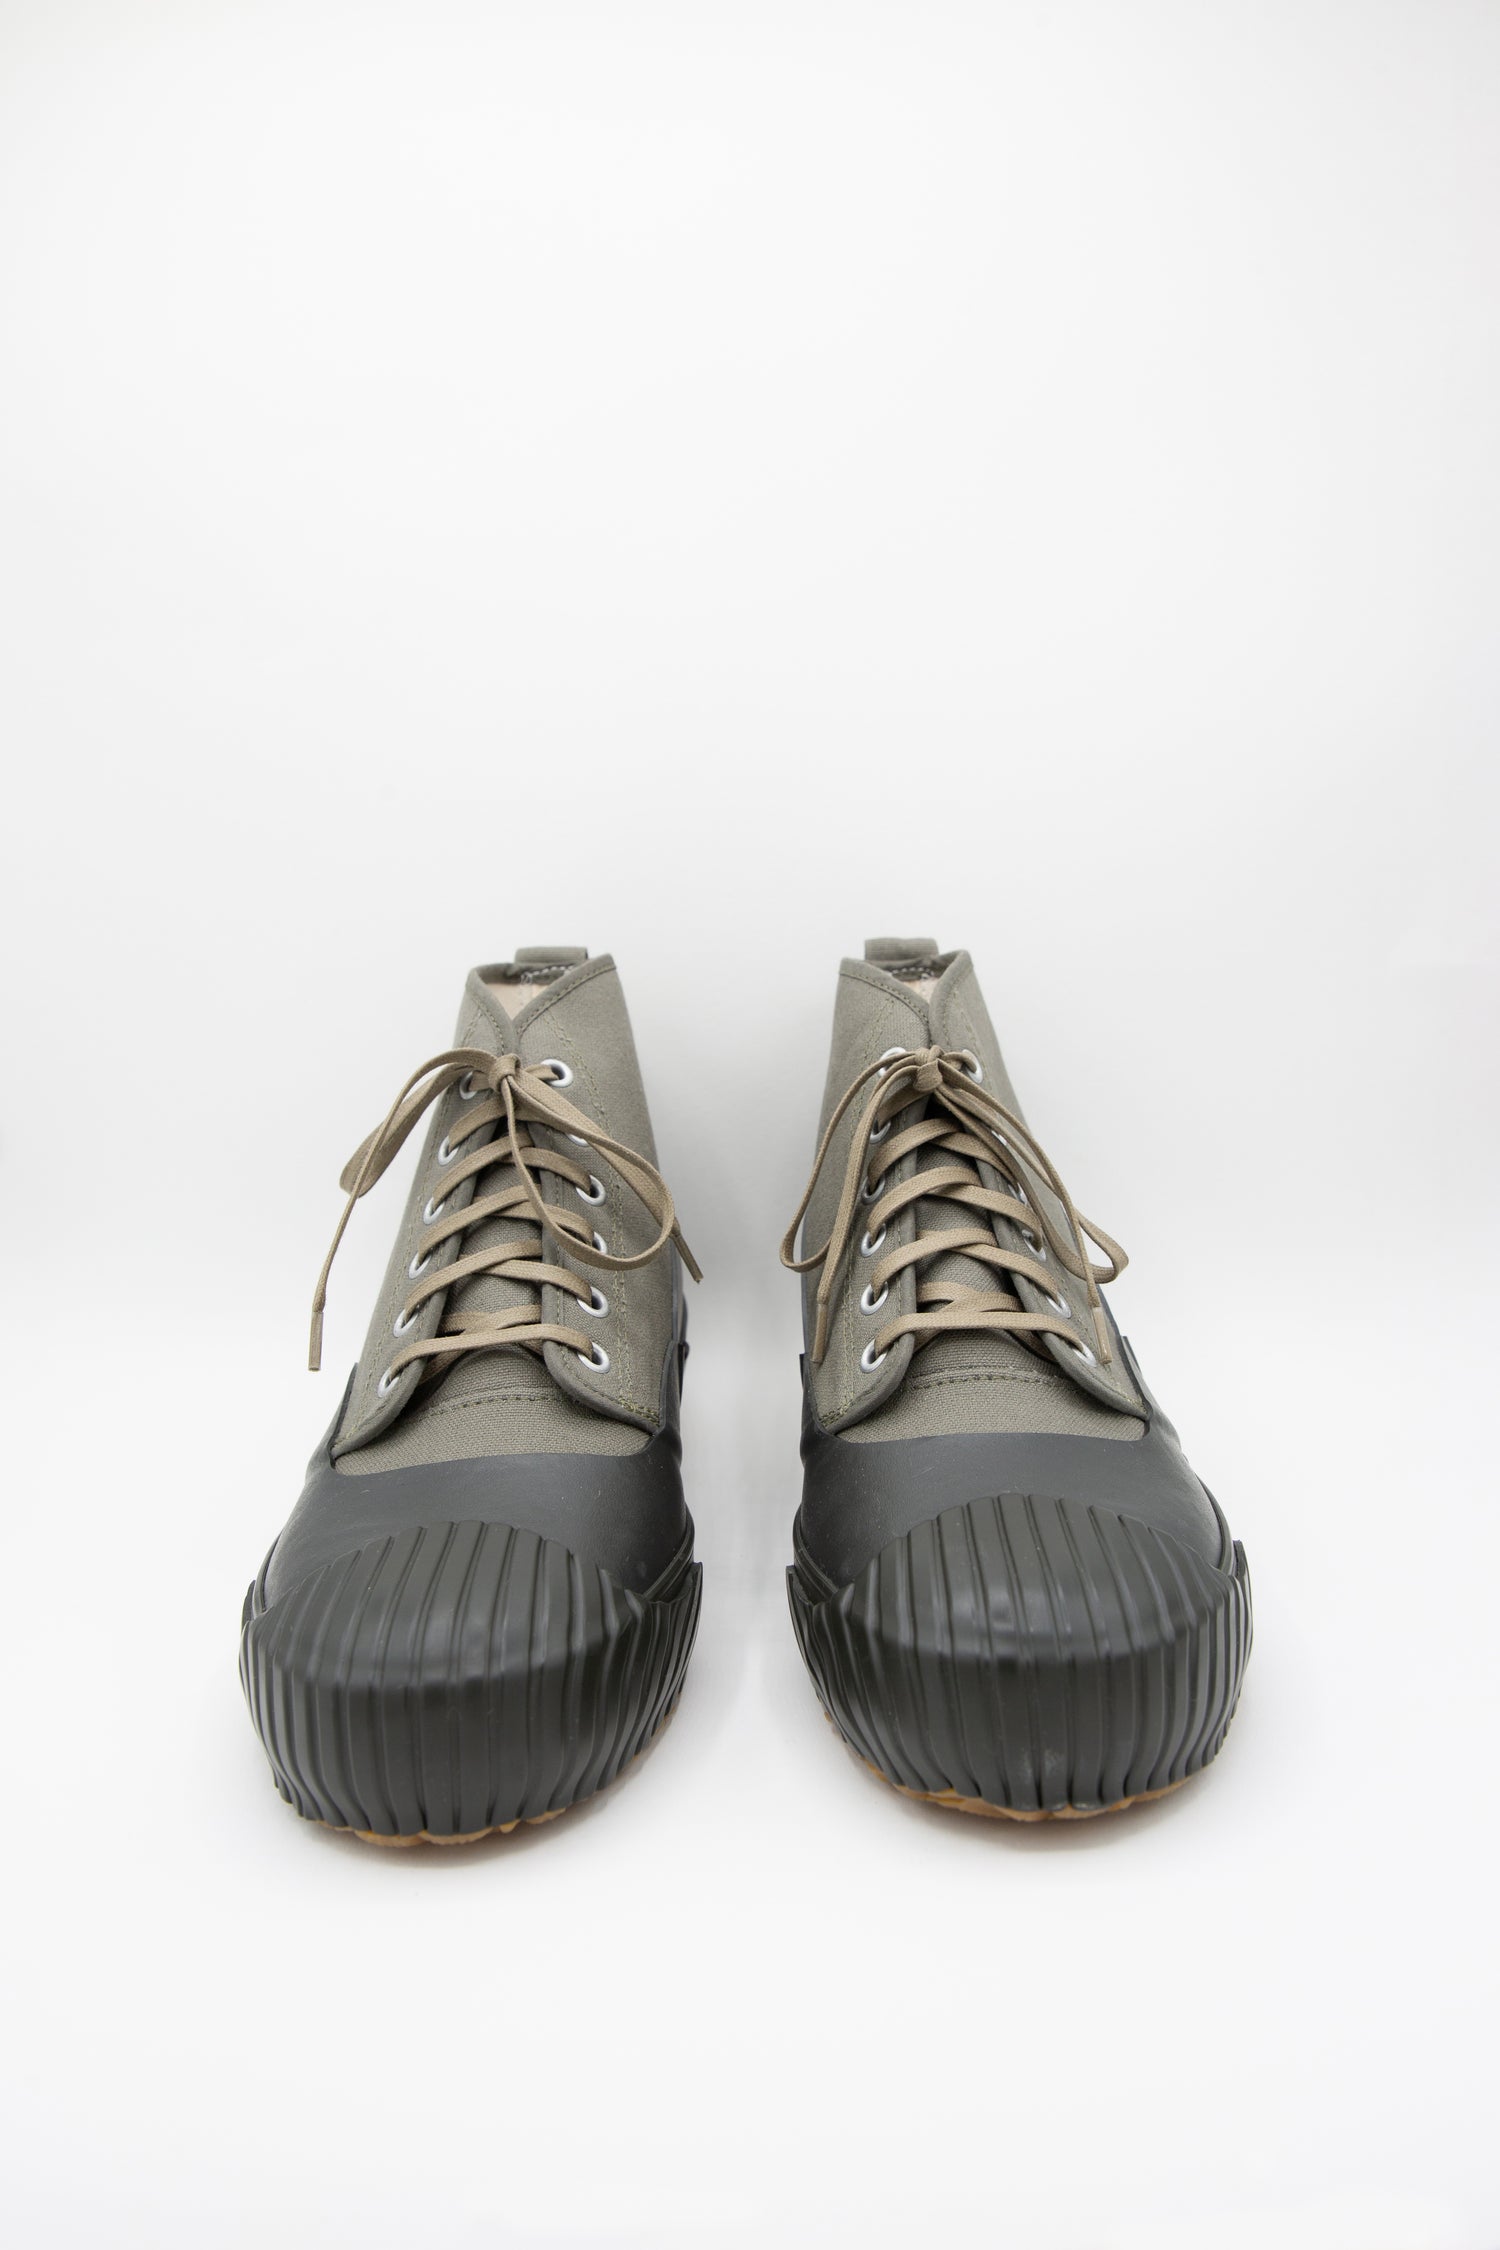 A pair of Moonstar Alweather Sneakers in Olive with a rubber sole on a white background. Front view.